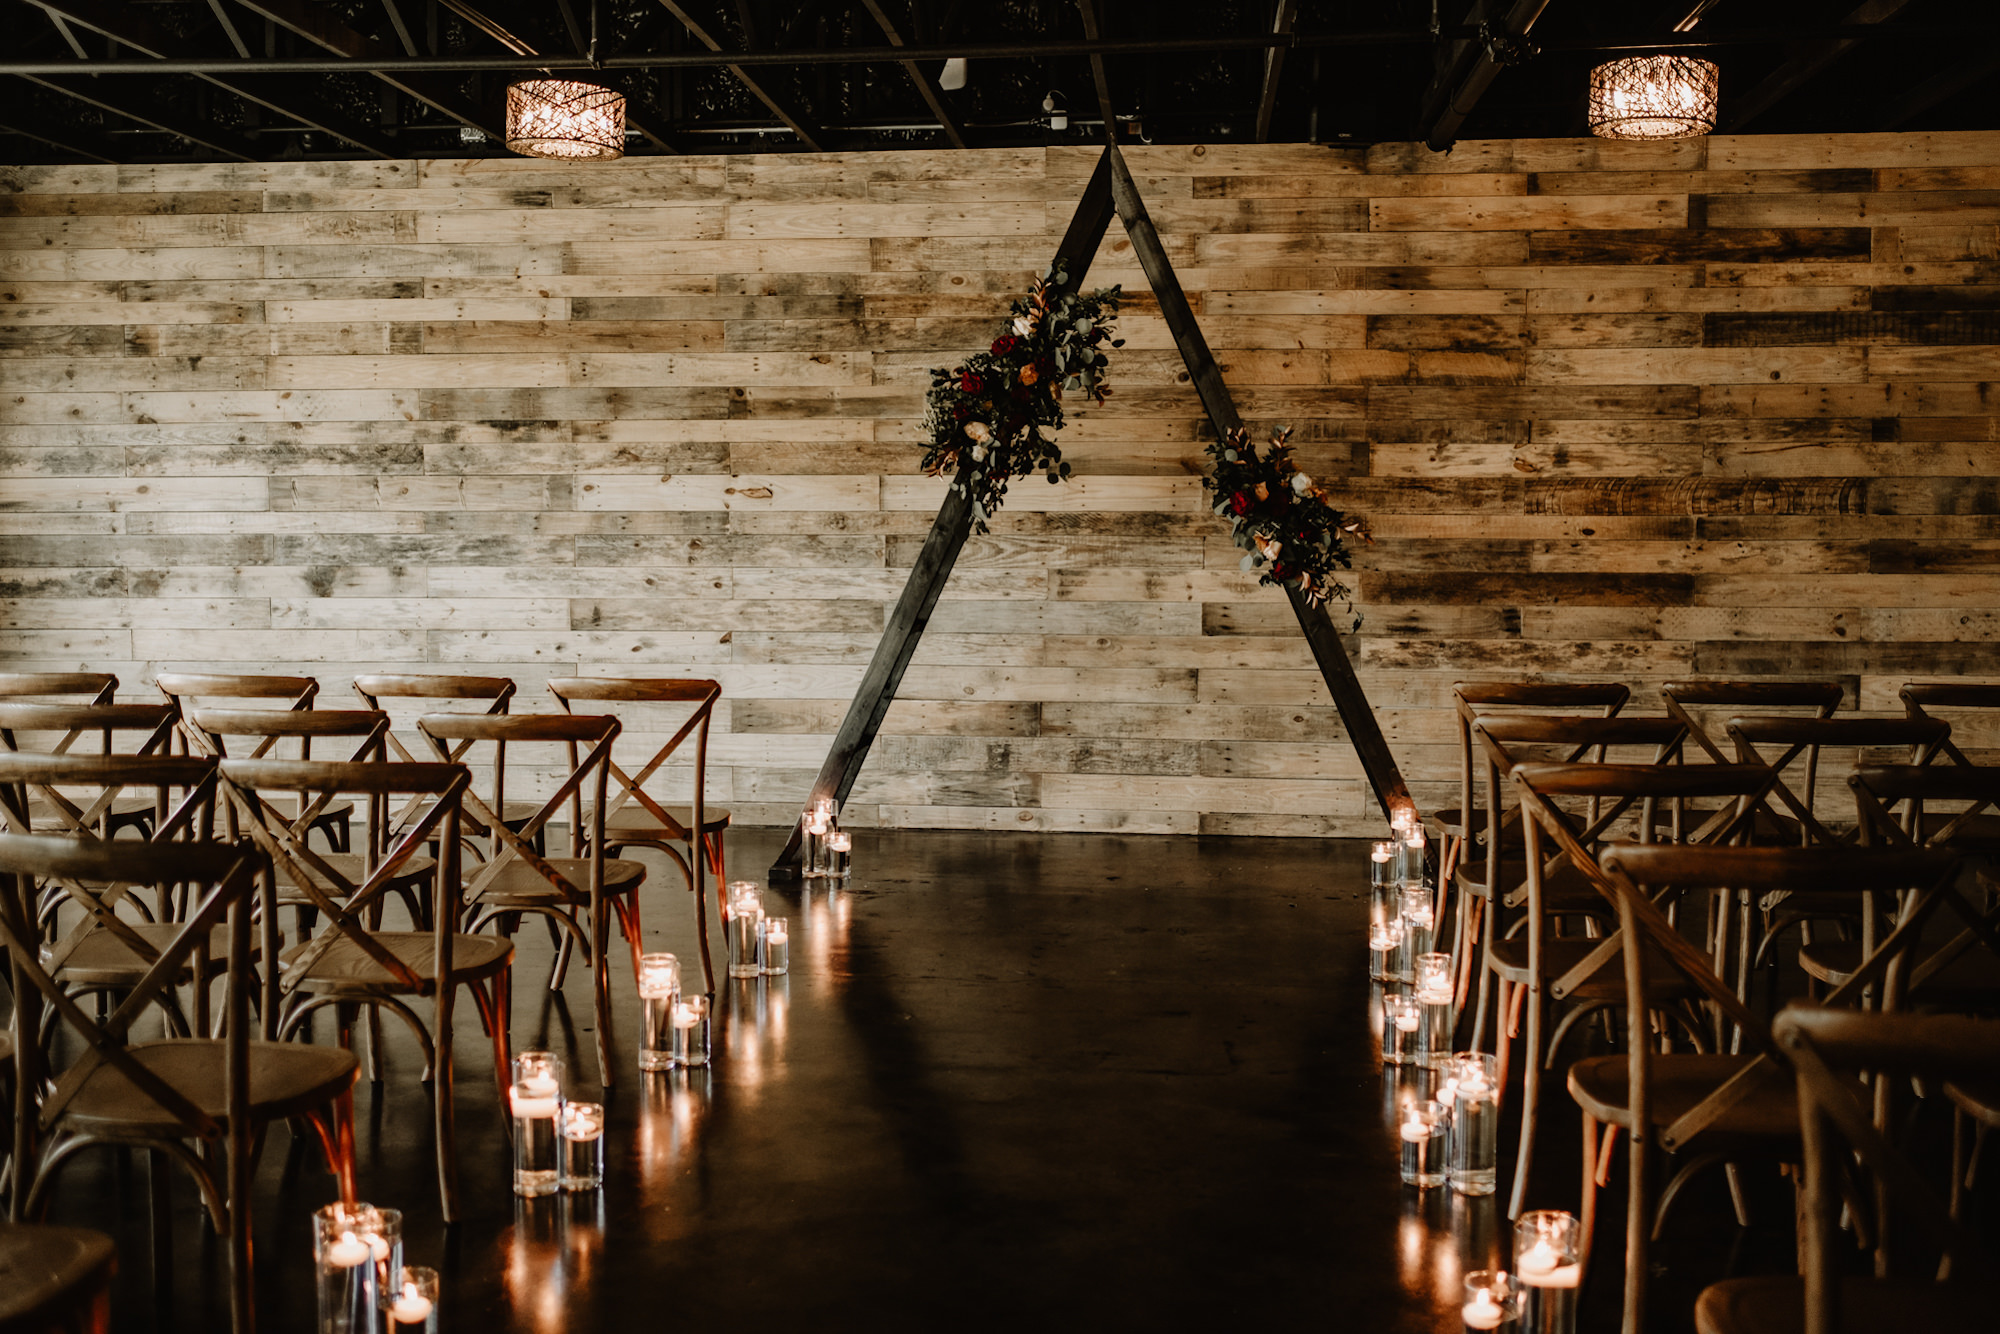 Triangle Ceremony Arch with Maroon, Cream, and Orange Flowers | Candle Lit Aisle Decor Inspiration | Indoor Ceremony Pallet Wood Wall | Tampa Bay Wedding Venue The West Events